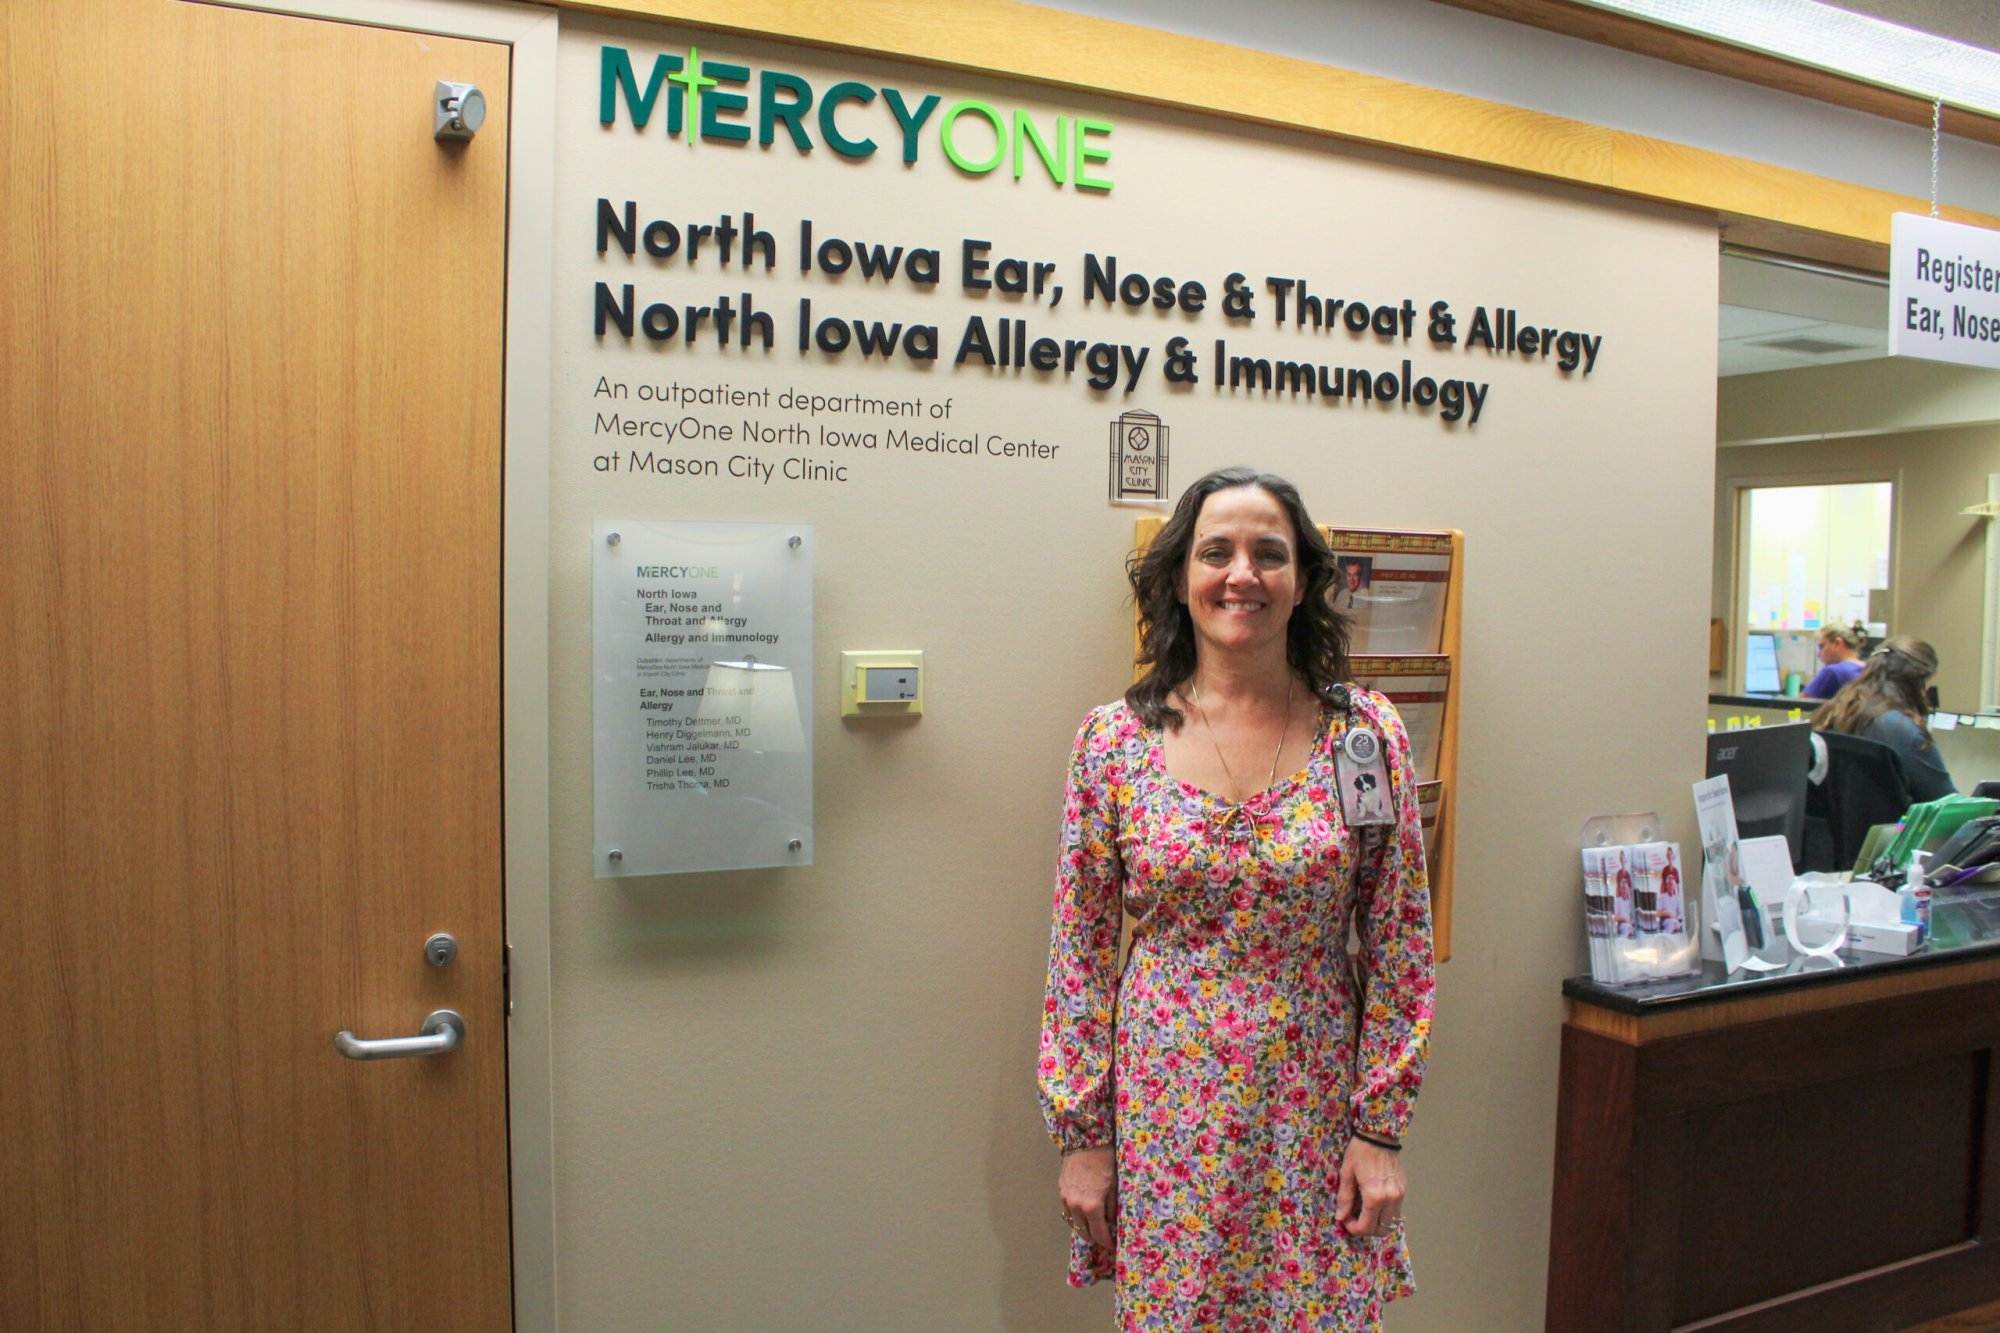 Woman Finds Compassion and Caring When Seeking Medical Attention at the Mason City Clinic